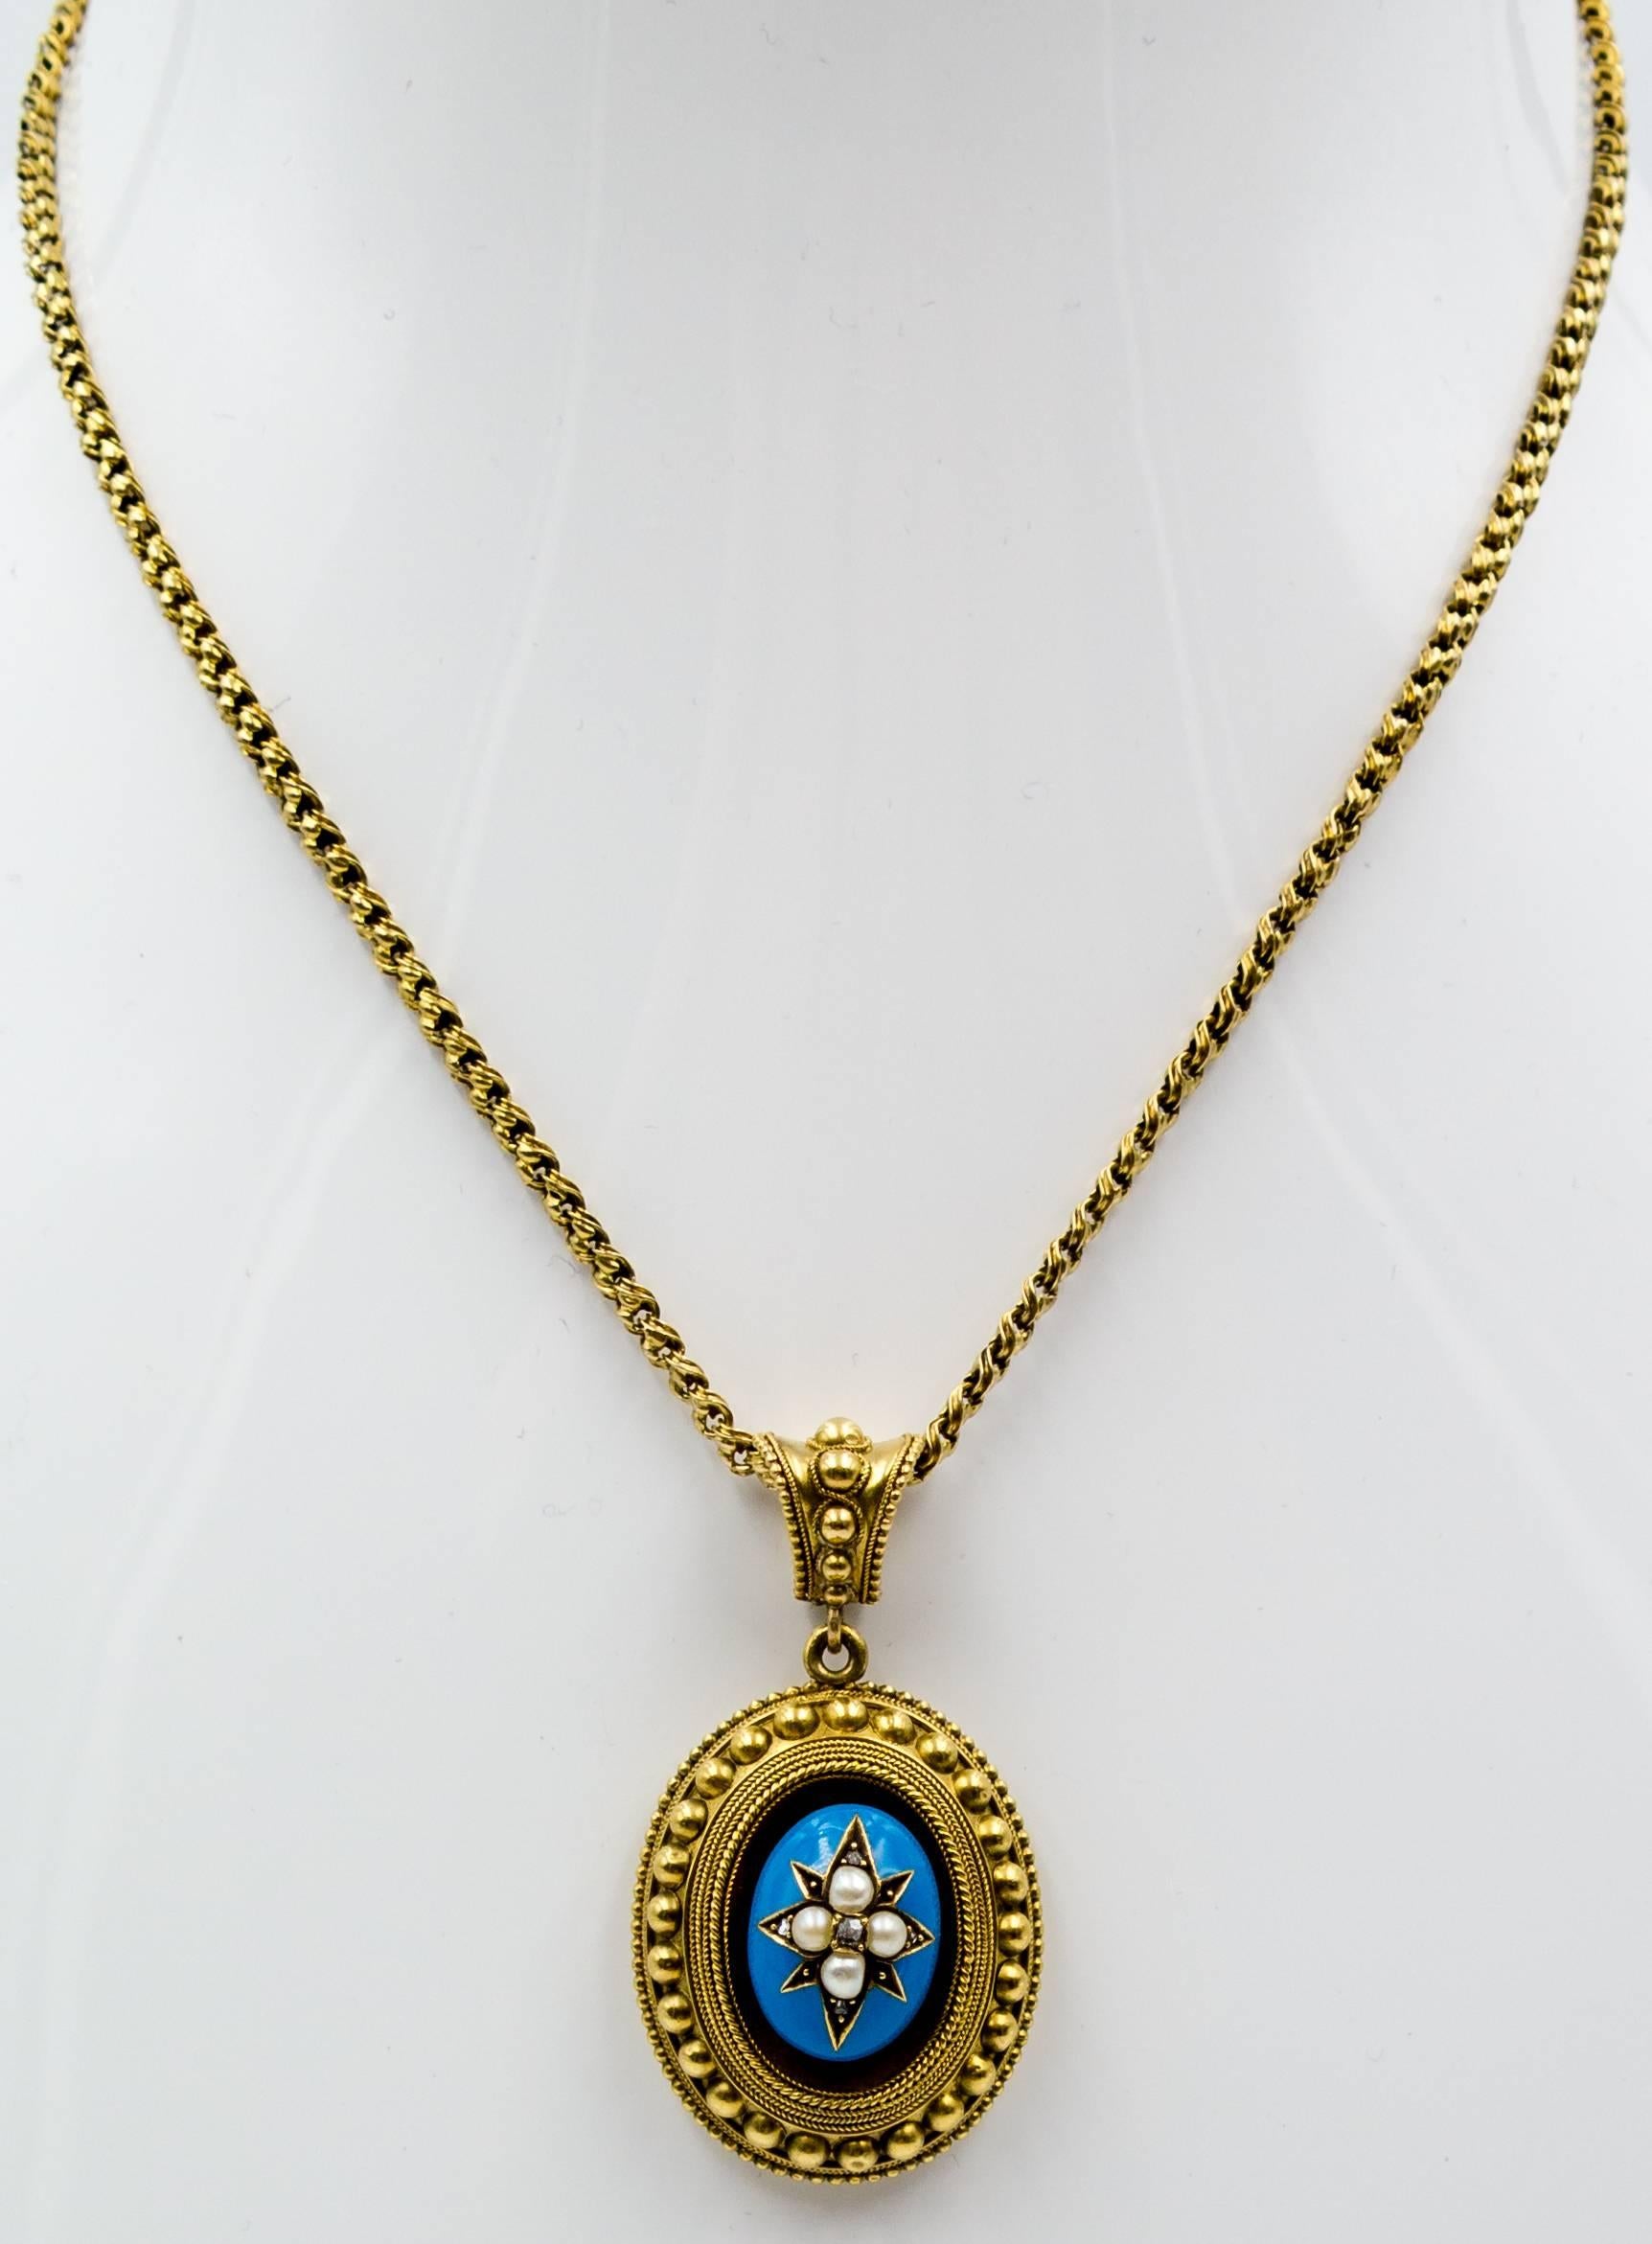 A slice of the Victorian era with this lovely robin's egg blue enamel and split pearl oval pendant adorned with intricate gold wirework and granulation.  The pendant alone is 15 karat yellow gold, and measures 1 3/4 inches by 1 1/8 inches, and the